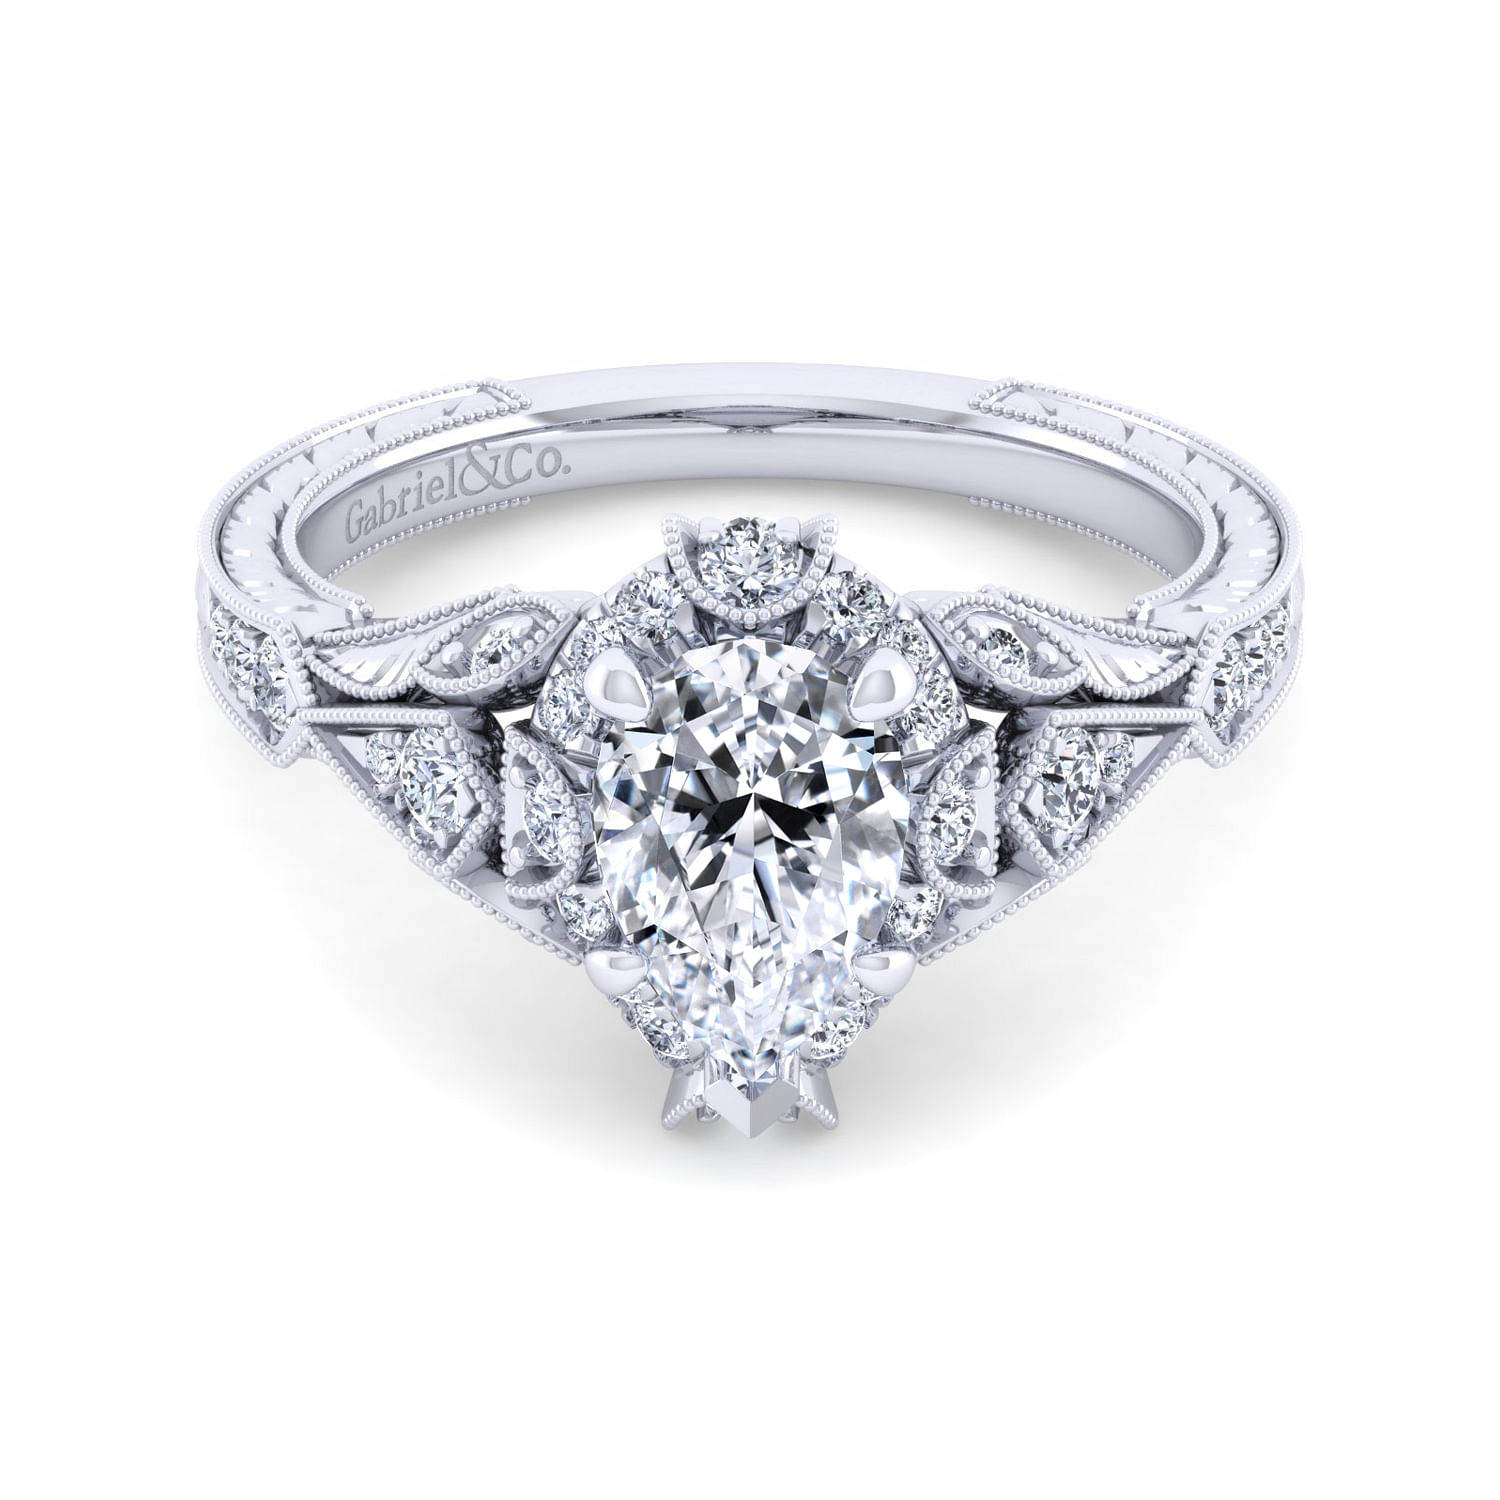 Annadale - Unique 14K White Gold Vintage Inspired Pear Shape Diamond Halo Engagement Ring